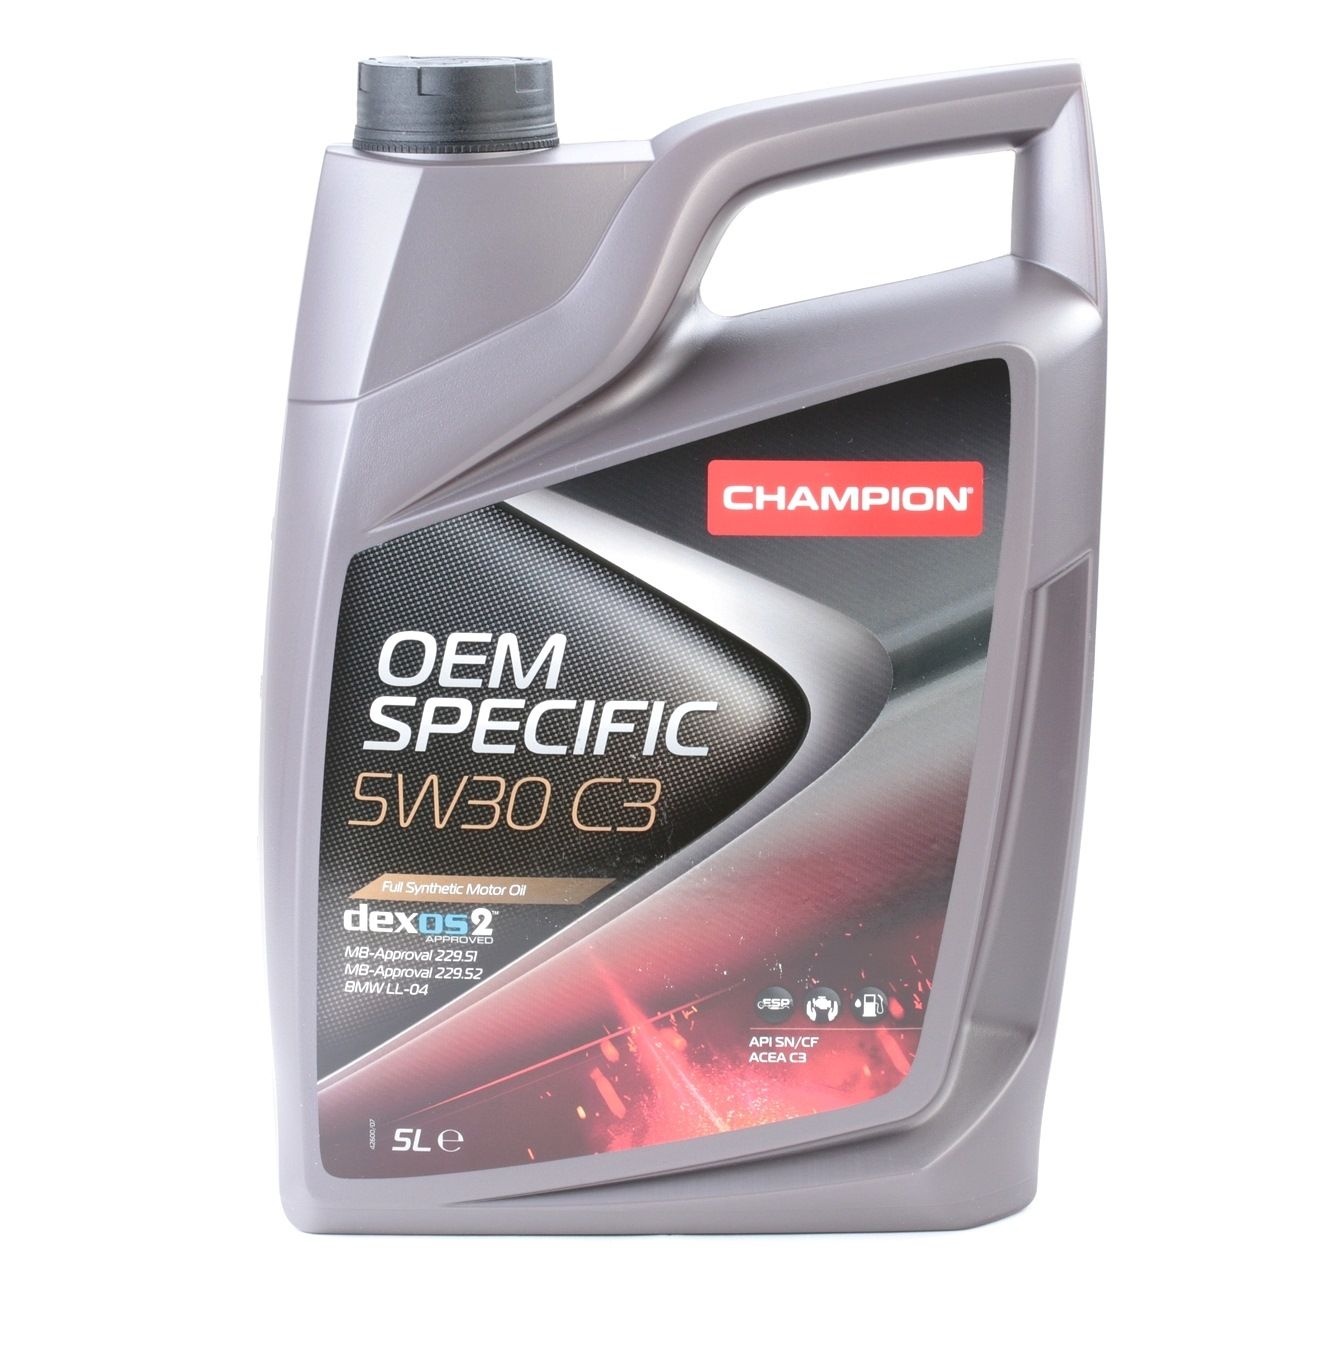 Масло 5w30 c4. Масло Champion Winter Oil 5w30. Champion OEM specific ATF Life protect 8.